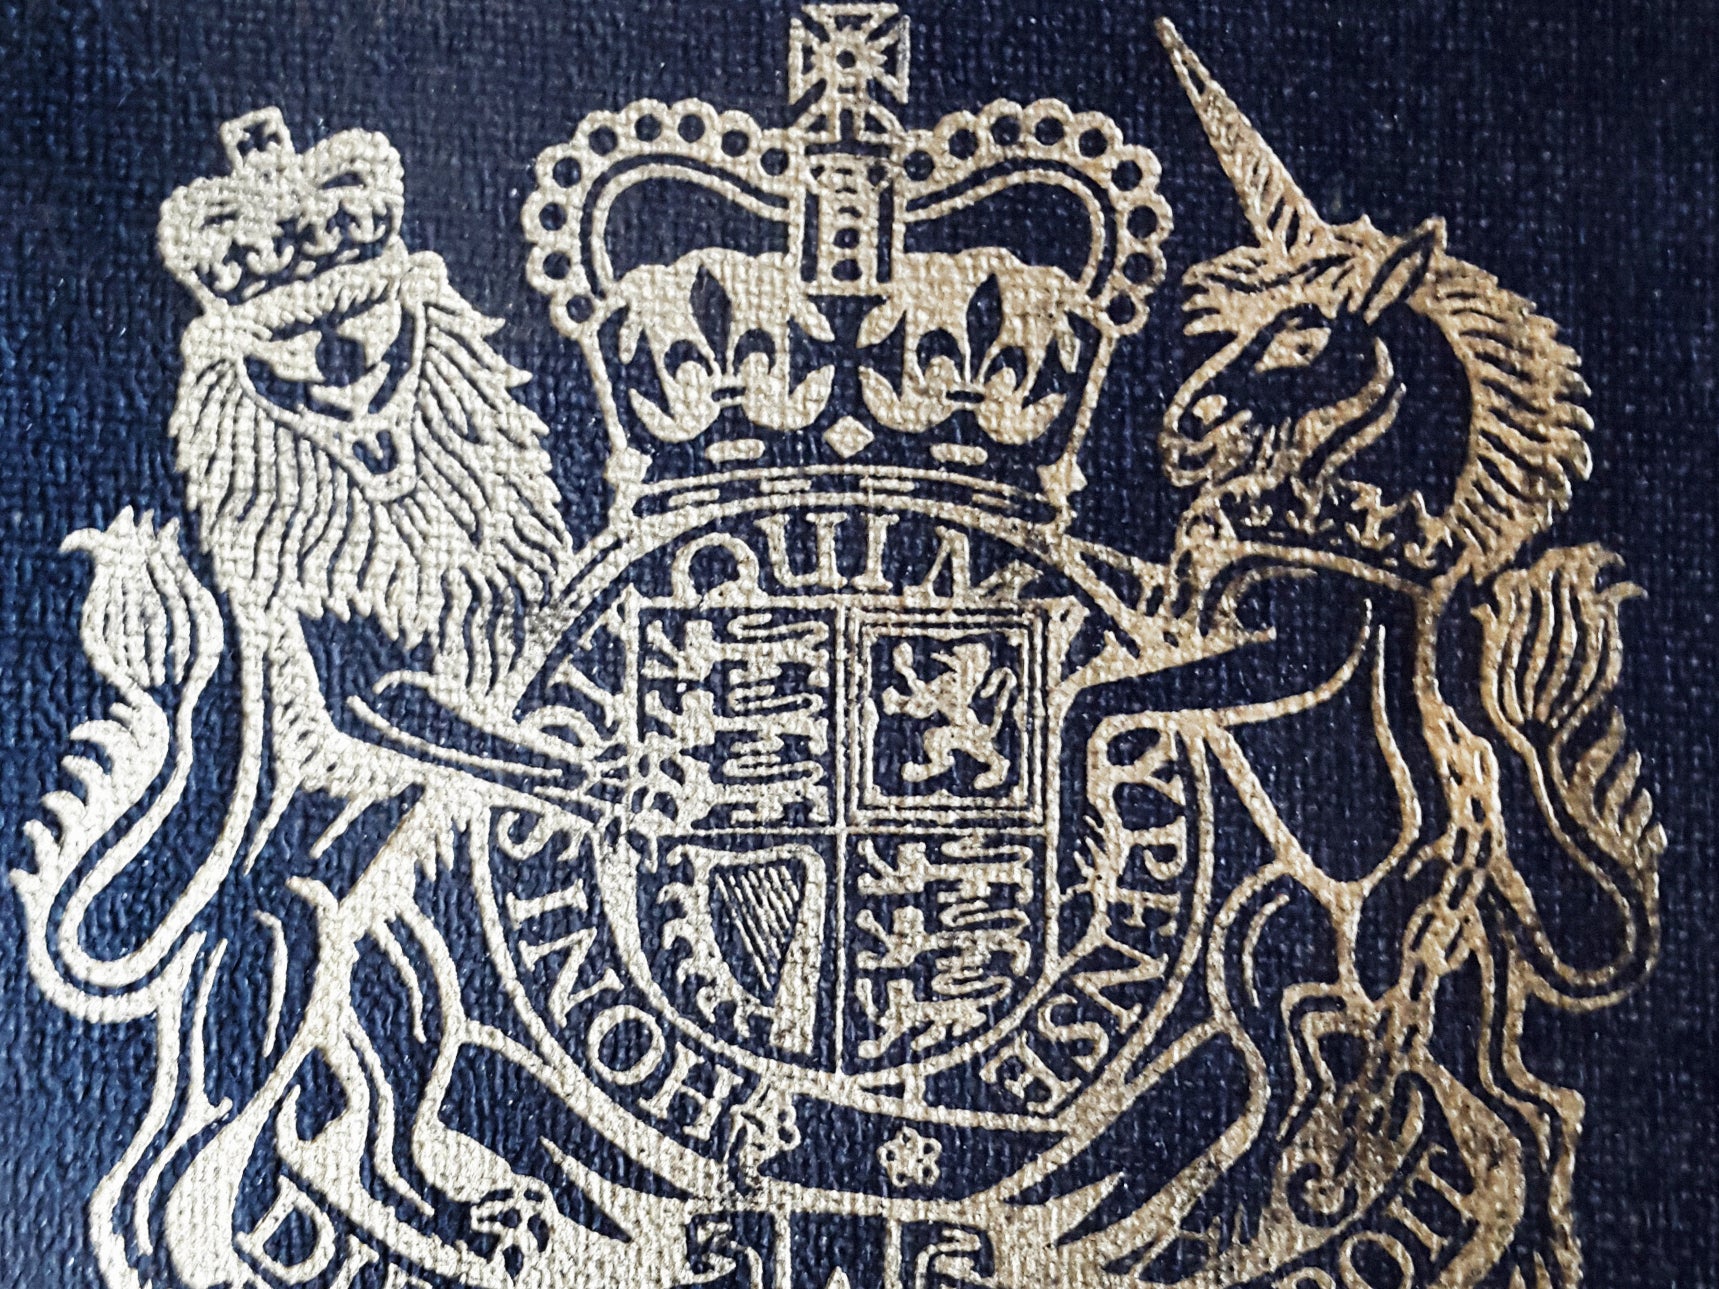 De La Rue is heading to court to challenge the government’s blue passport contract decision